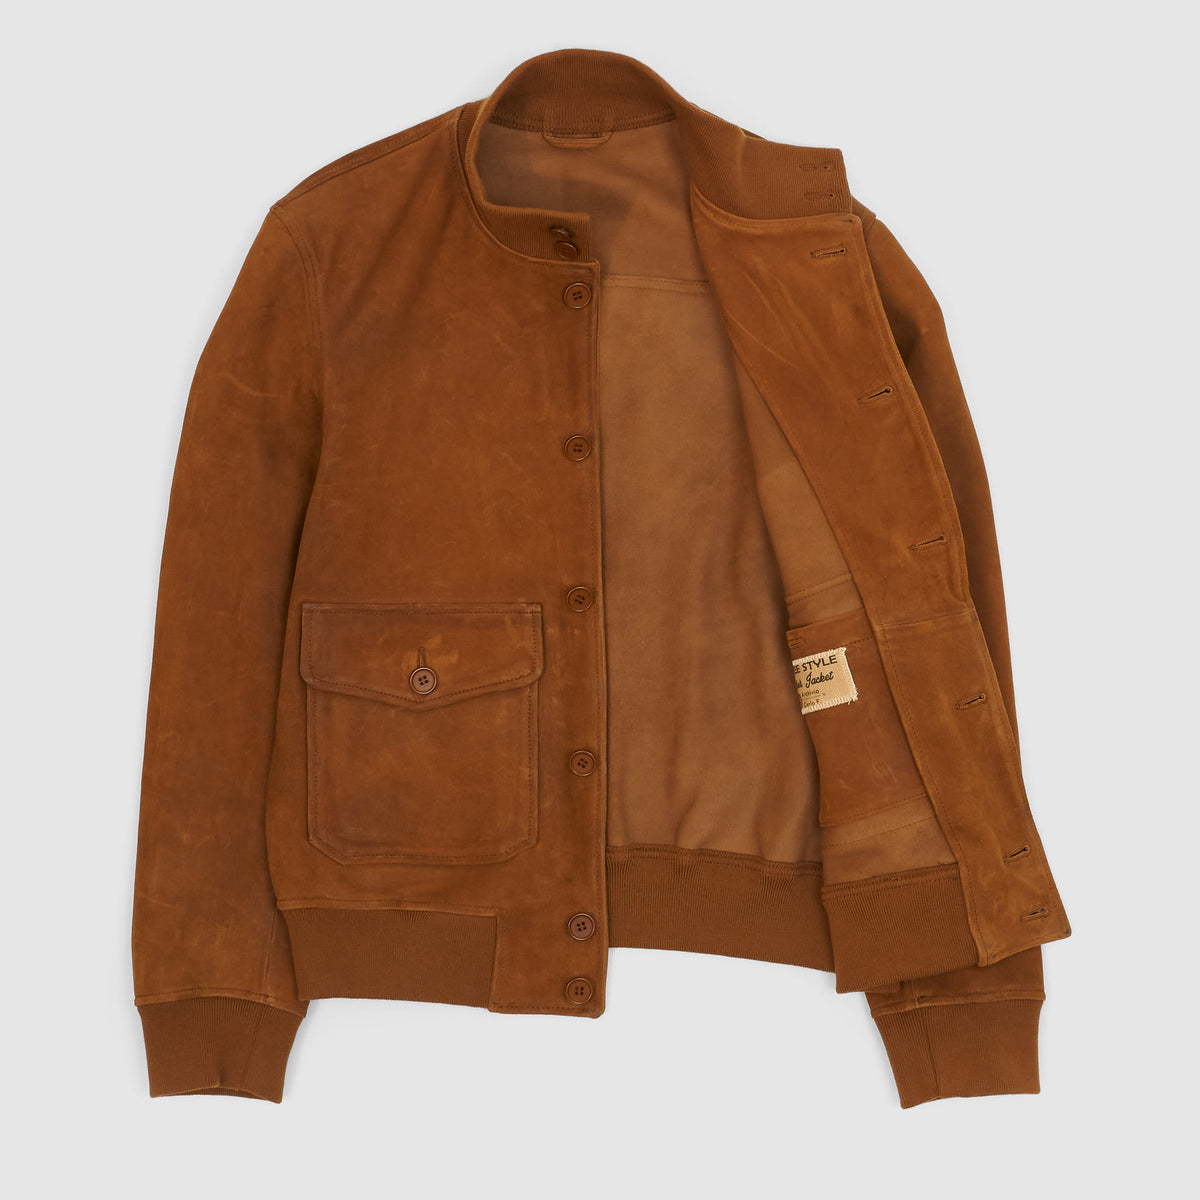 DeeCee style A1 Type Leather Jacket